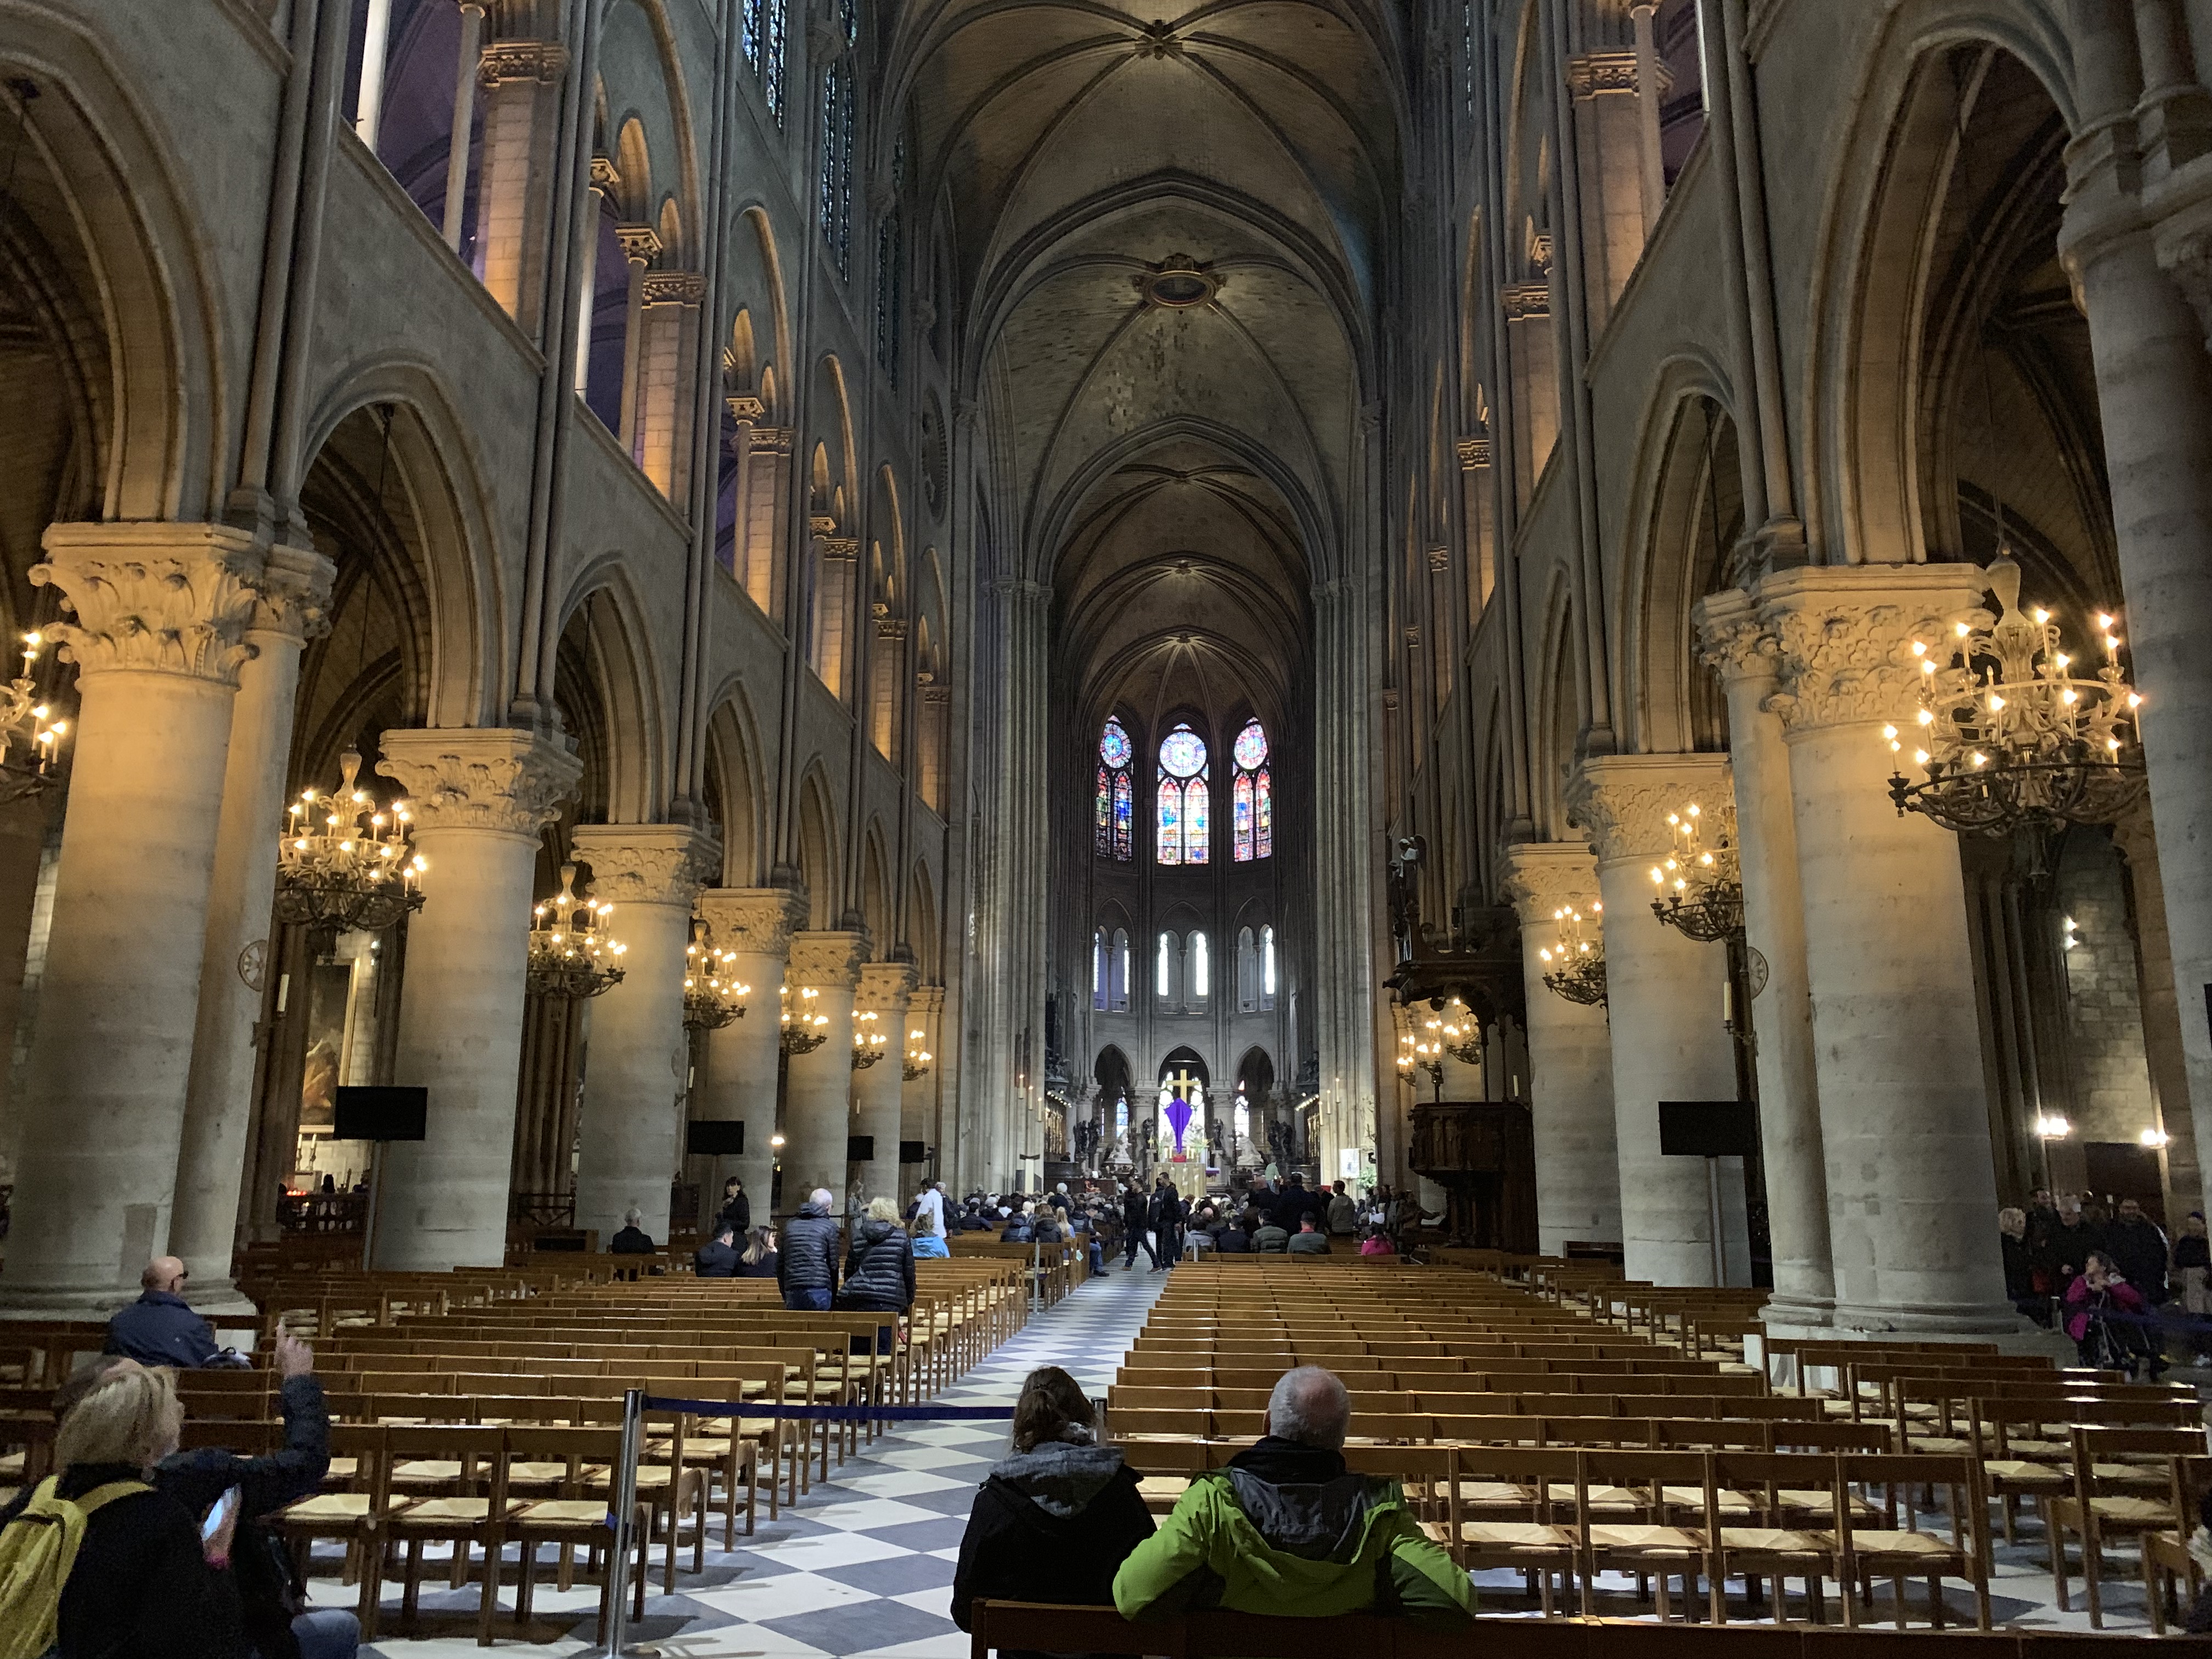 A Visit to Notre-Dame Just Before the Fire